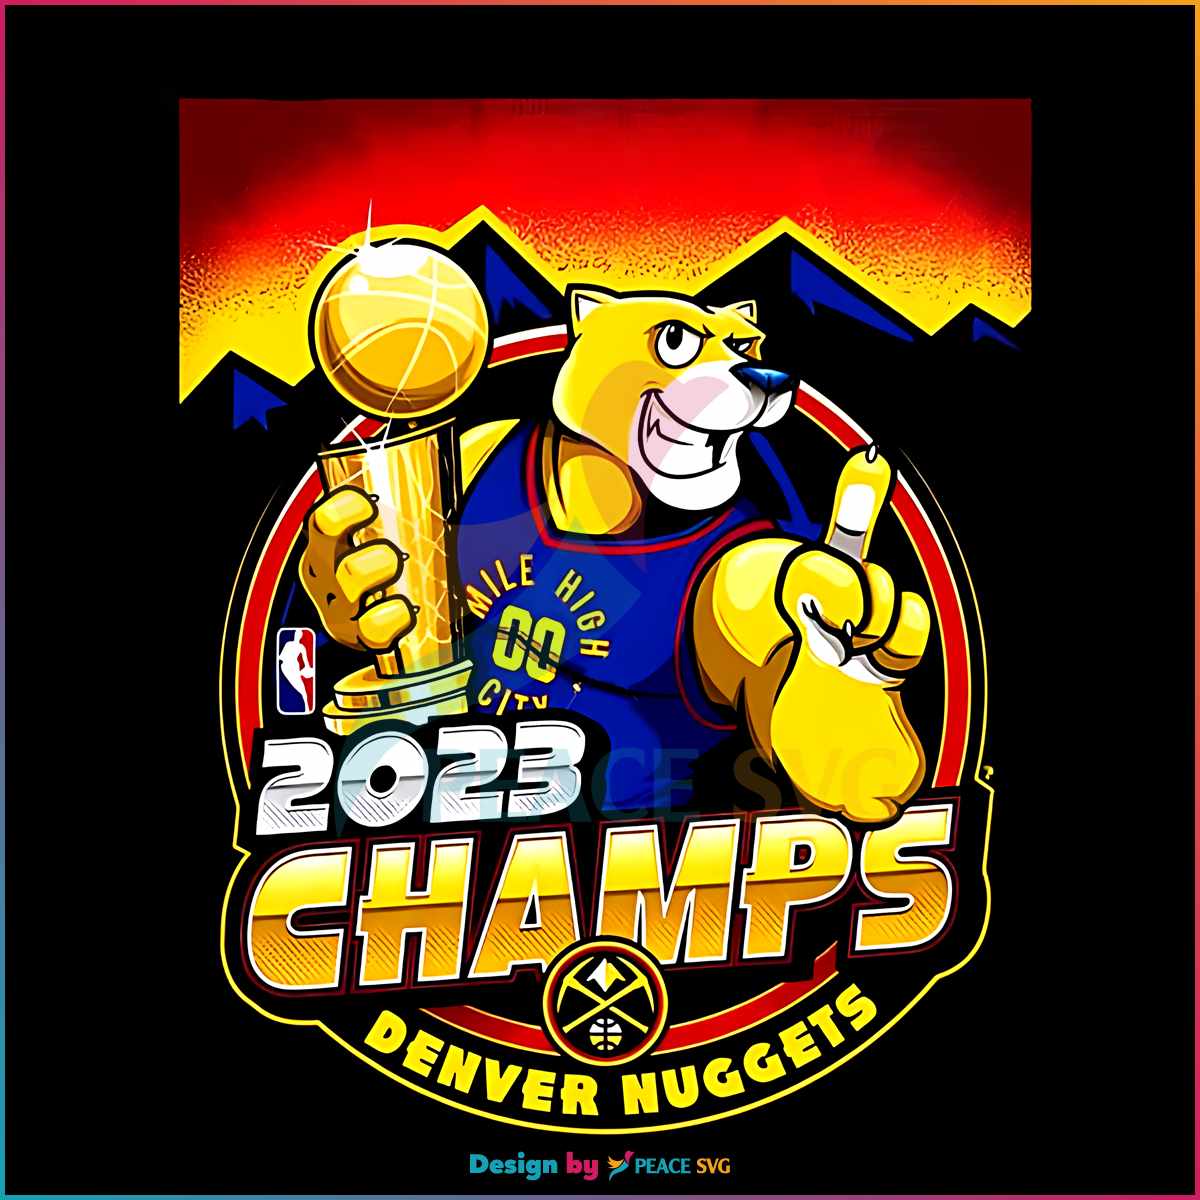 2023 NBA Champs Are Denver Nuggets PNG Silhouette Files » PeaceSVG